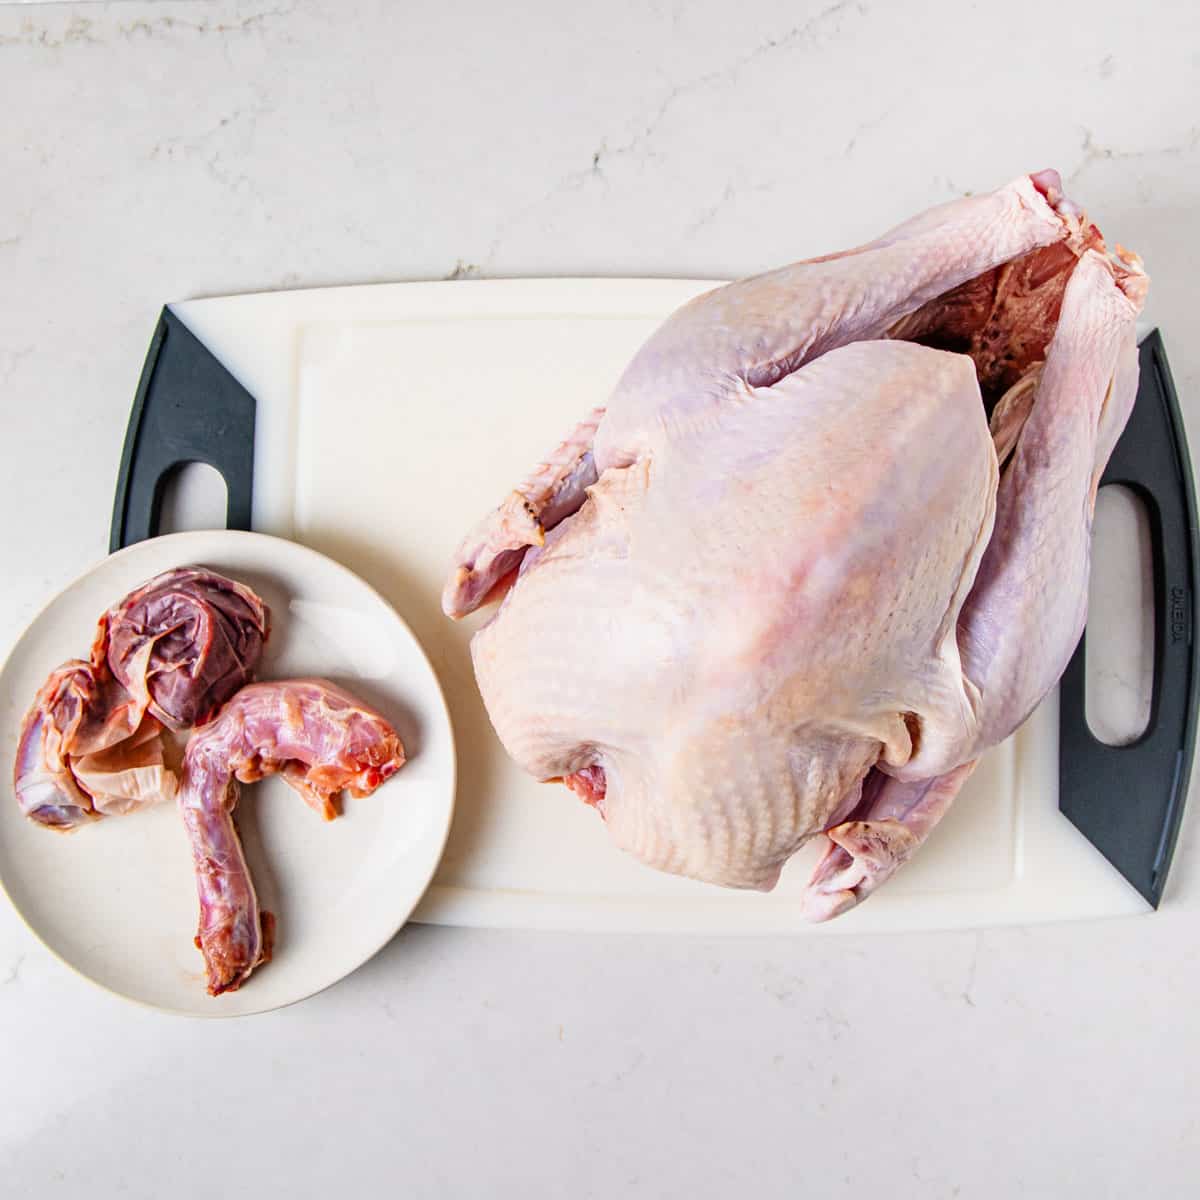 A turkey with the neck and giblets removed and sitting on a plate.